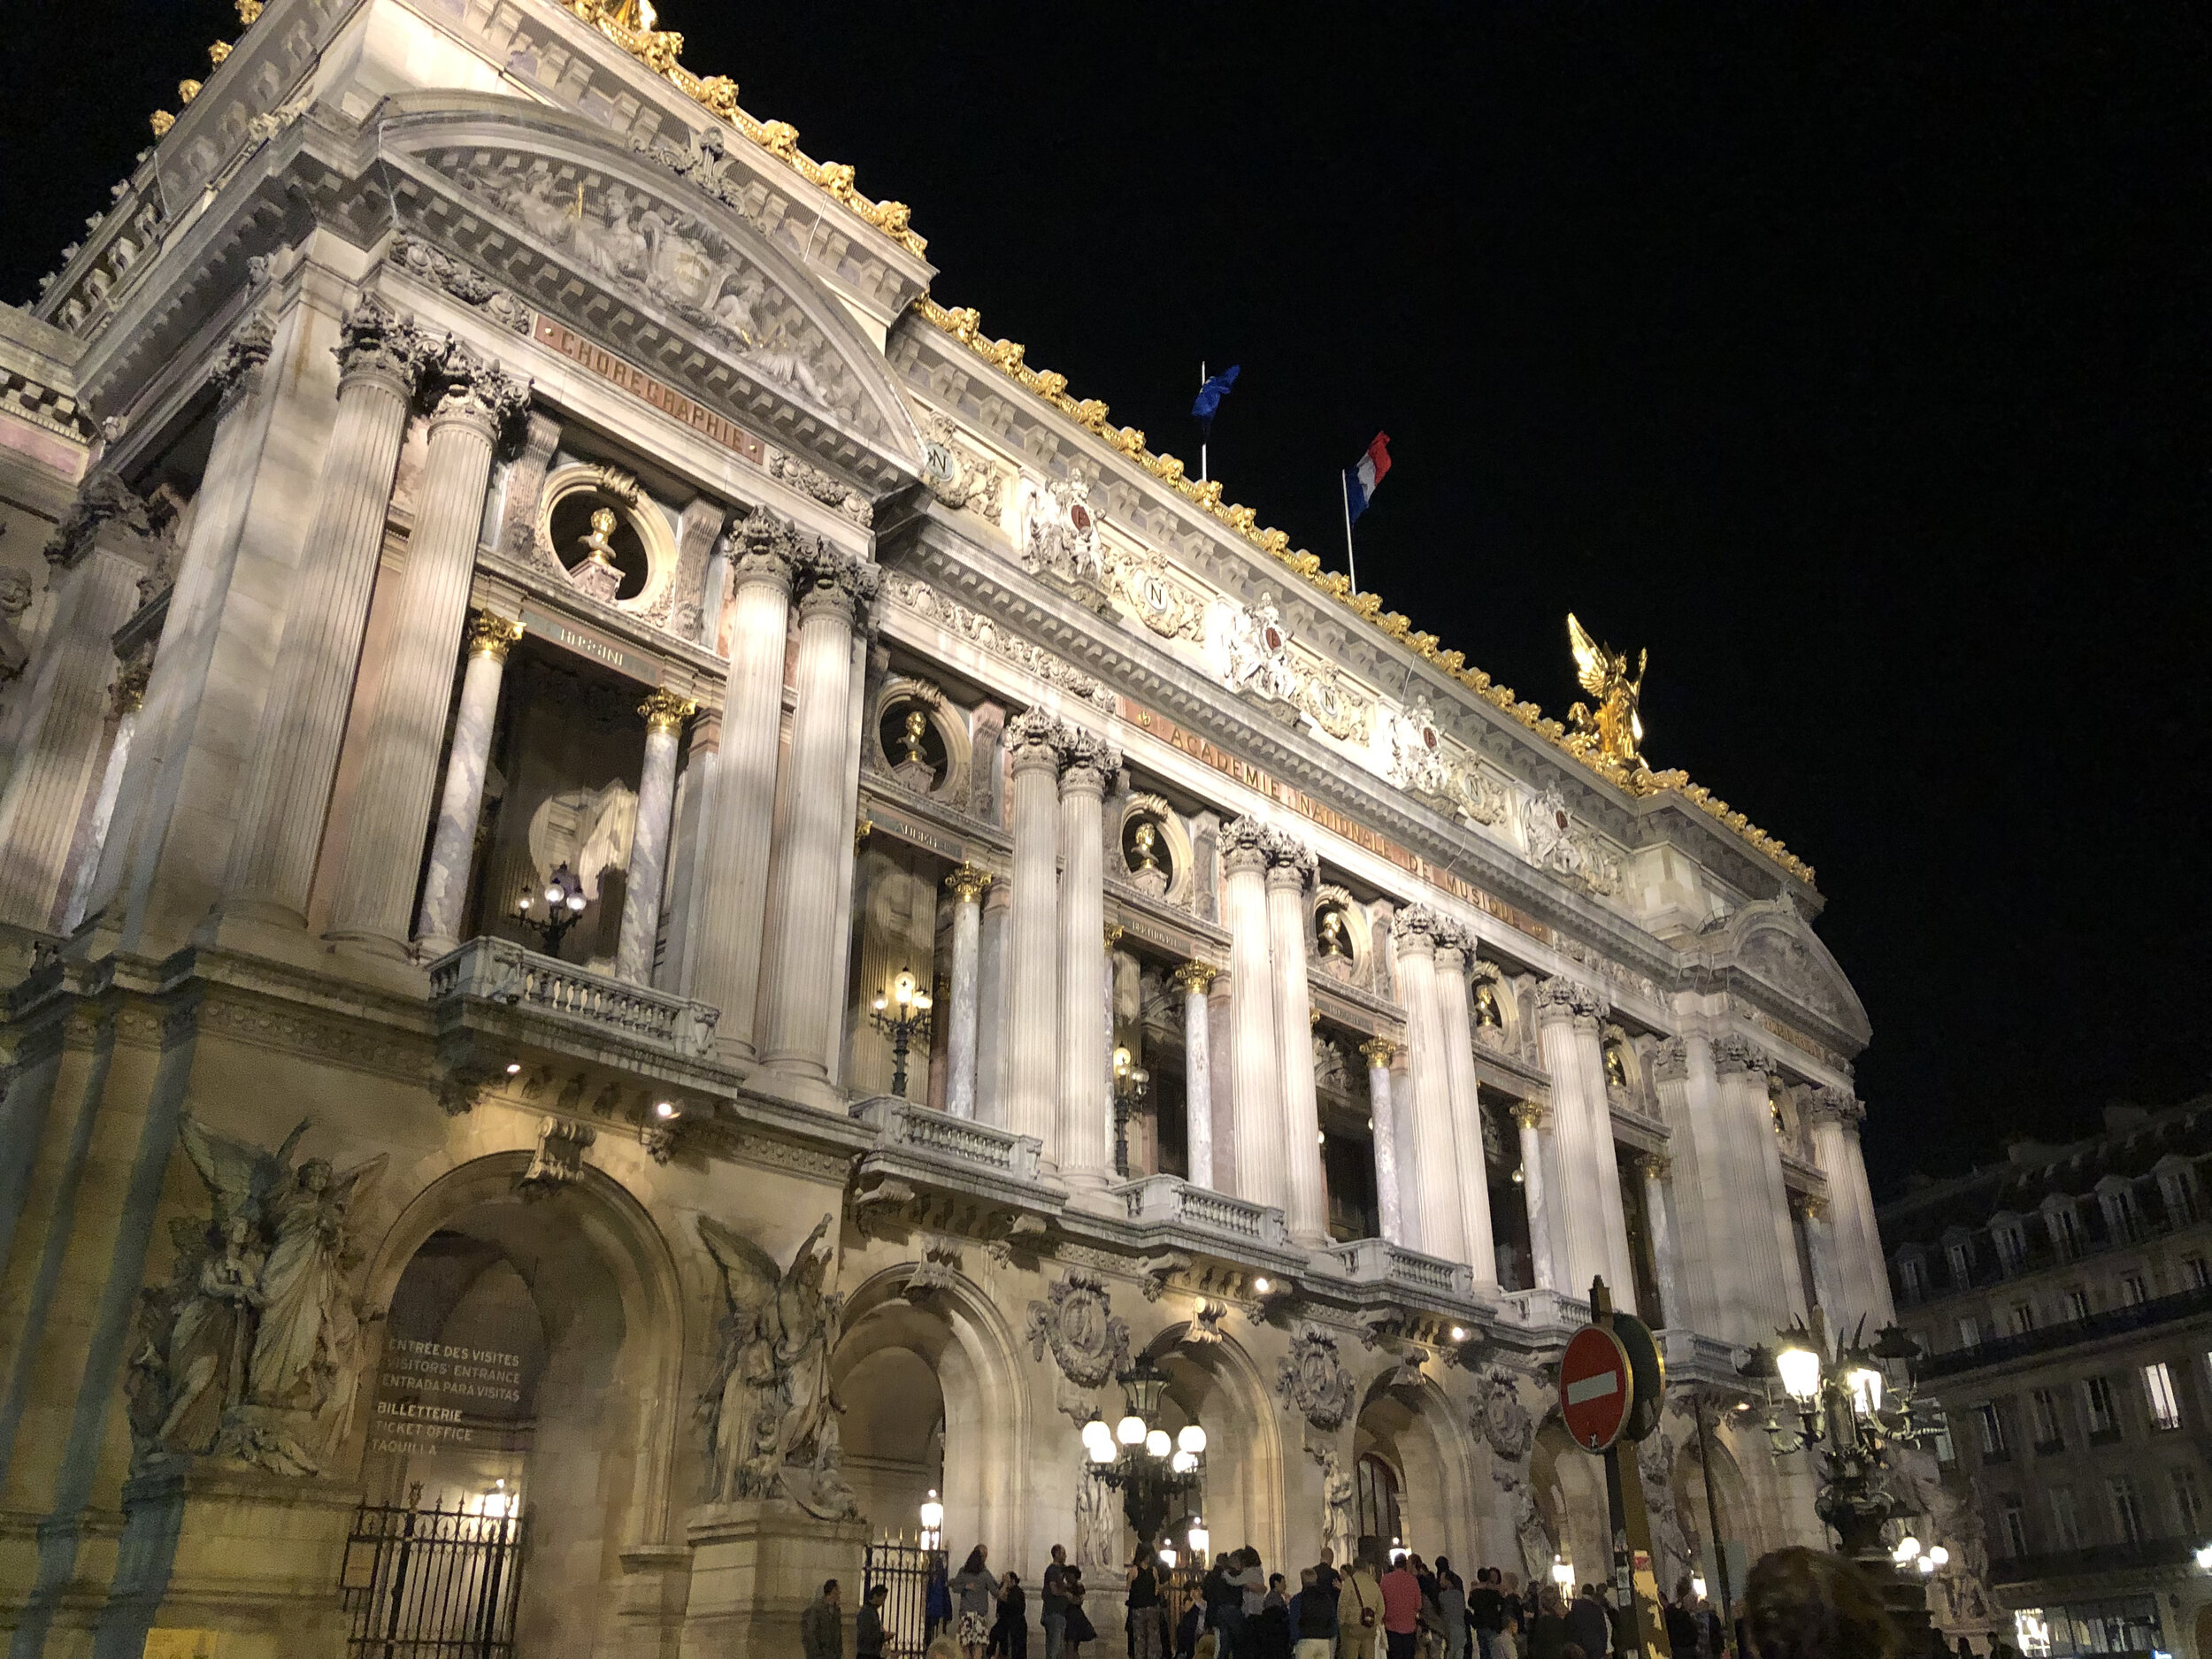 Walking home one evening, we spotted people waltzing on the steps of the Palais Garnier!